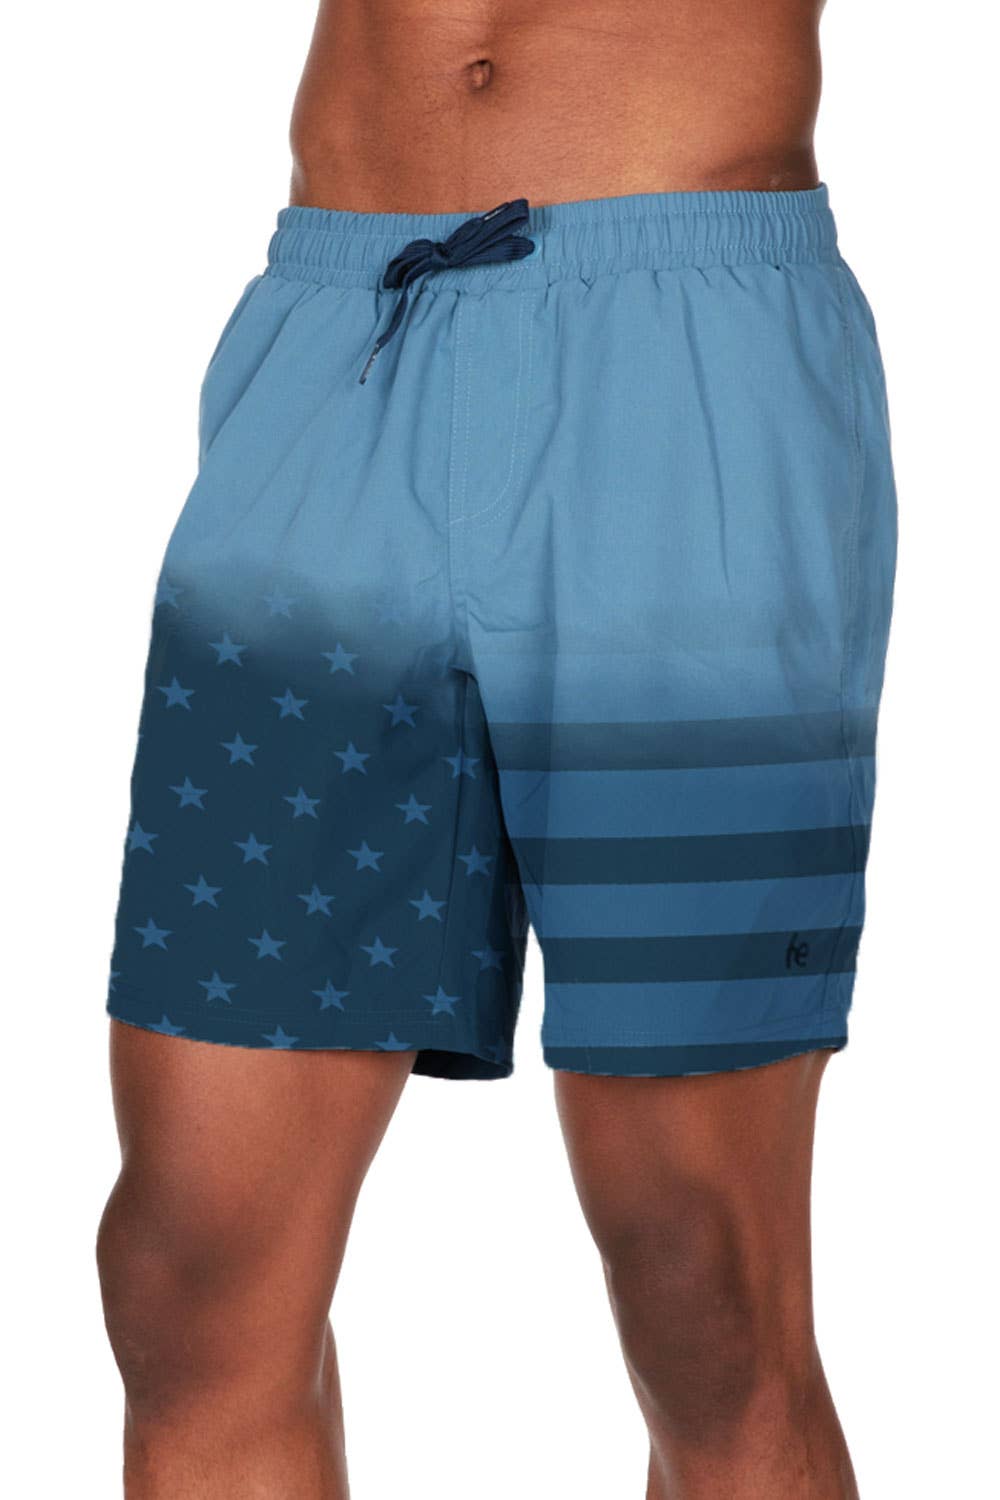 American Flag Color Changing Swim Trunks